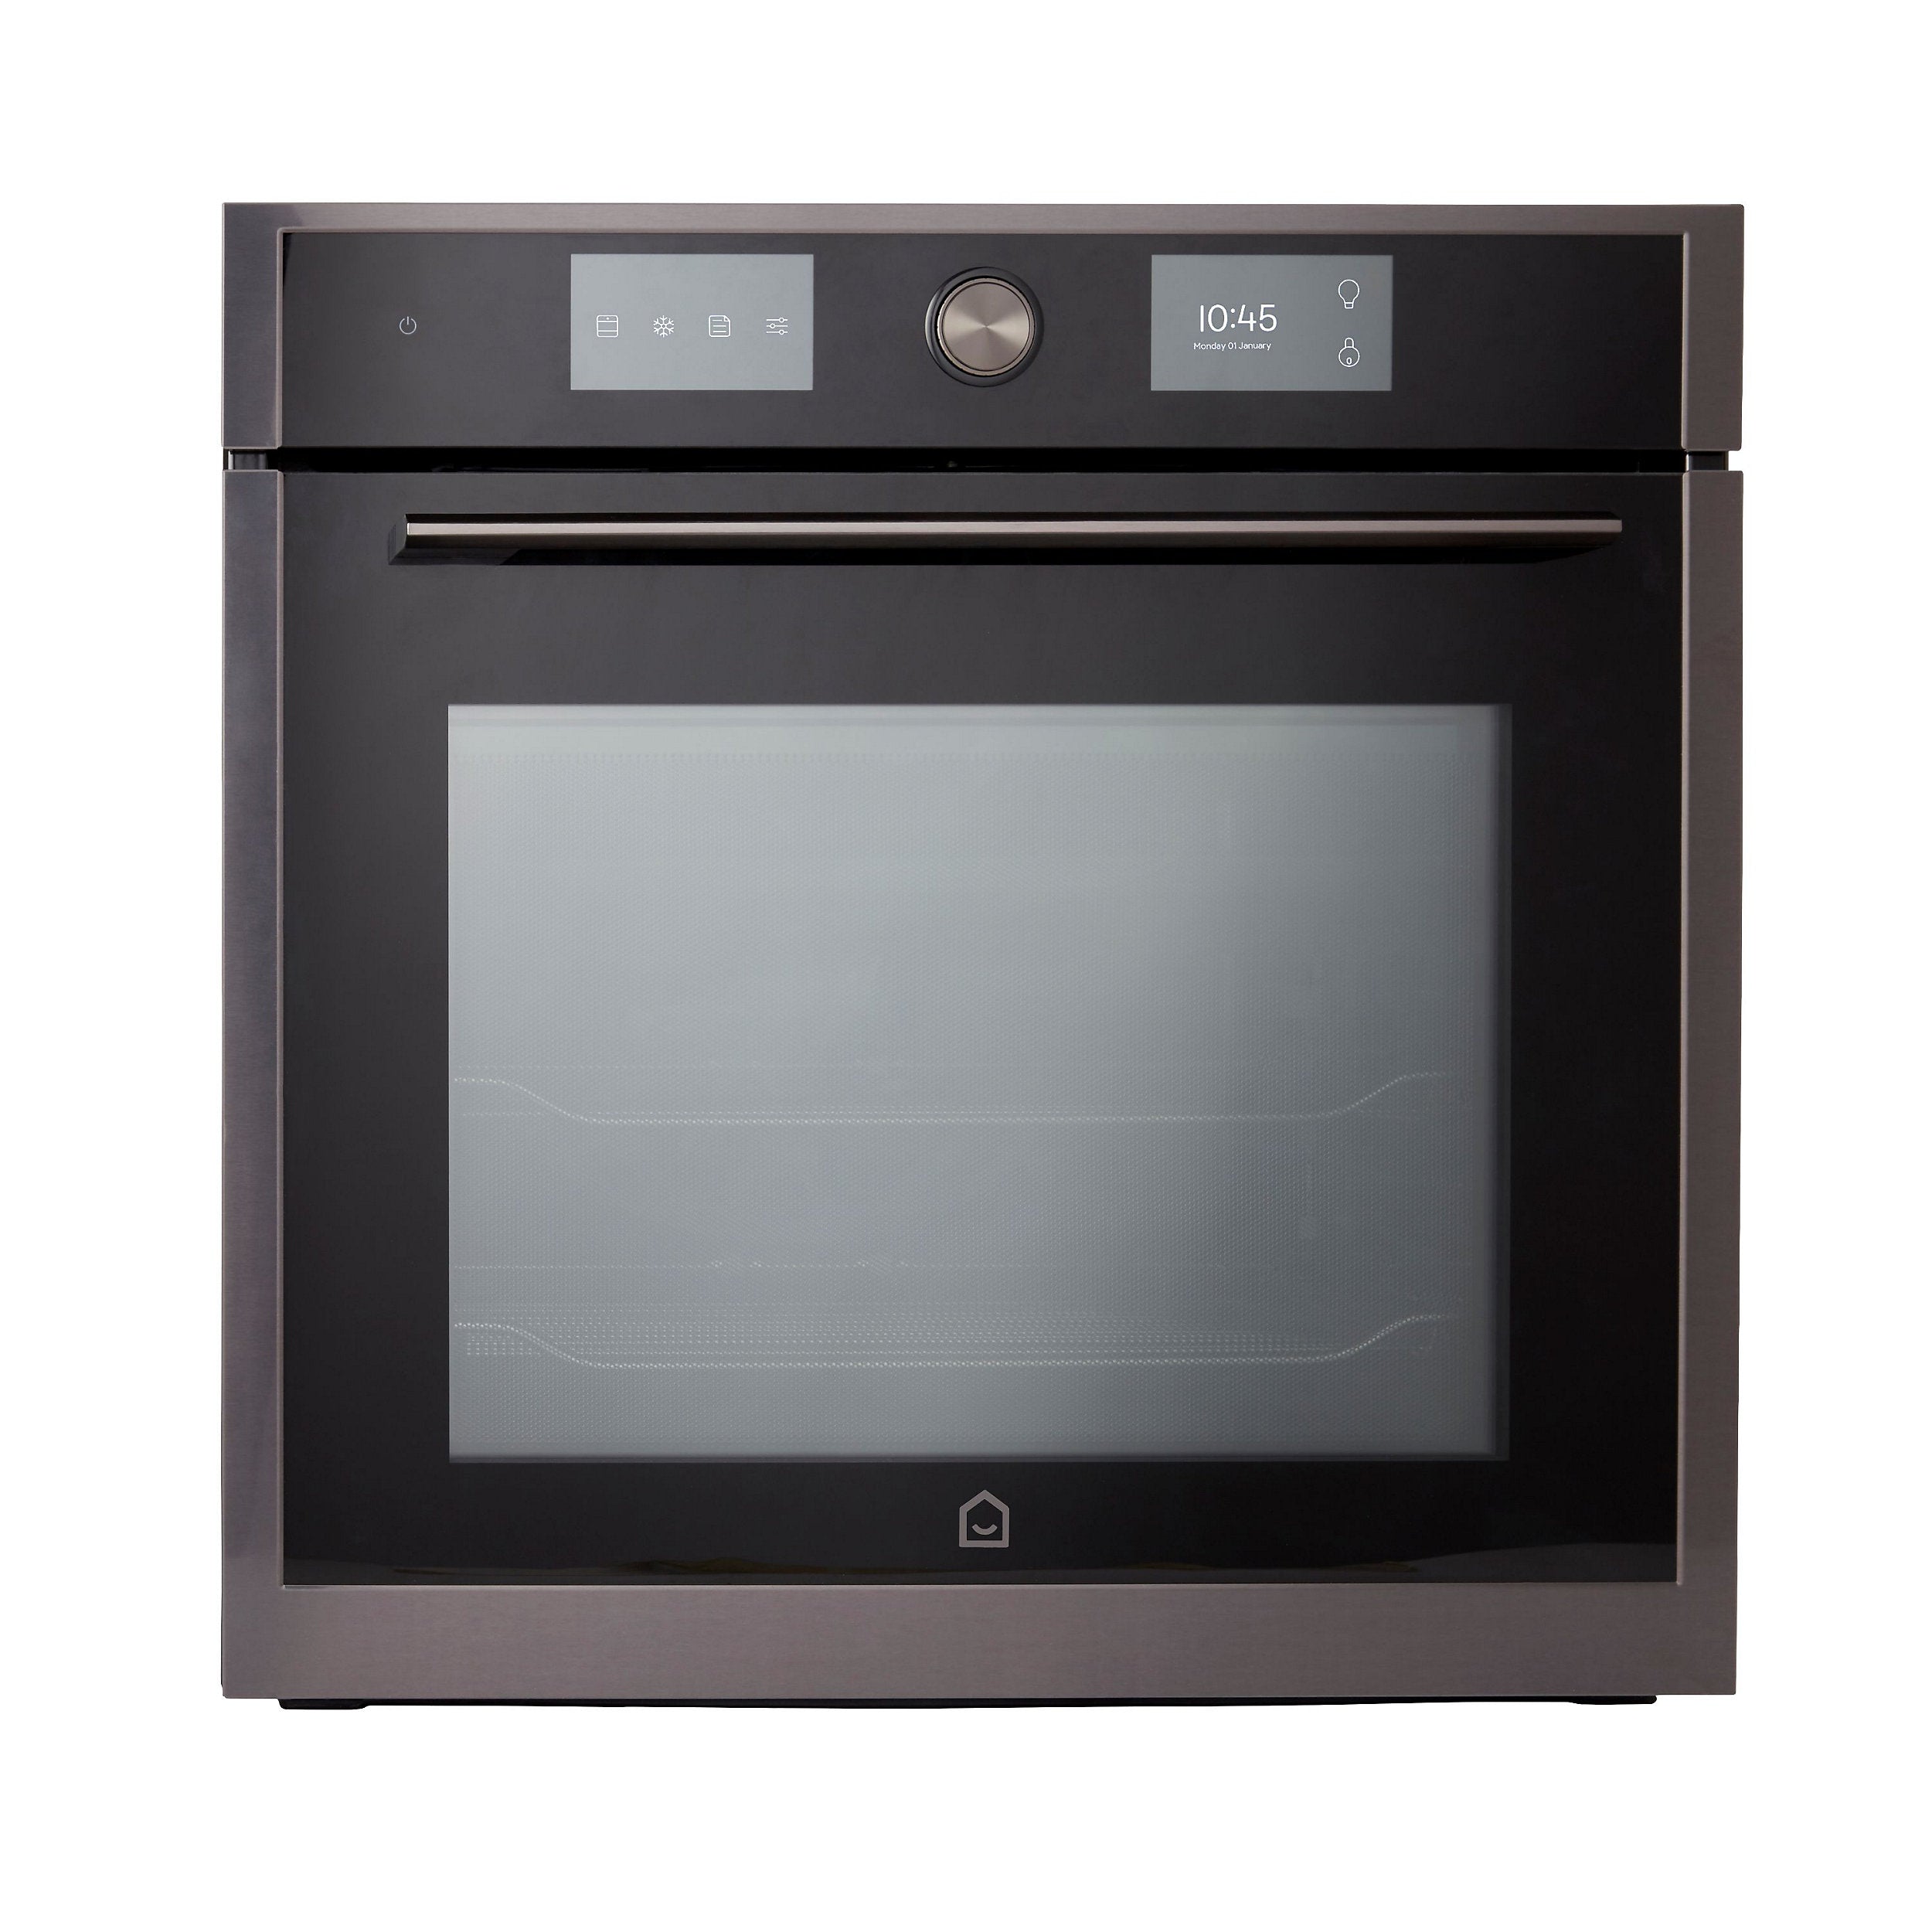 Neff Microwave Oven Built-in 60 x 45 cm Stainless Steel C1AMG84N0B 2036